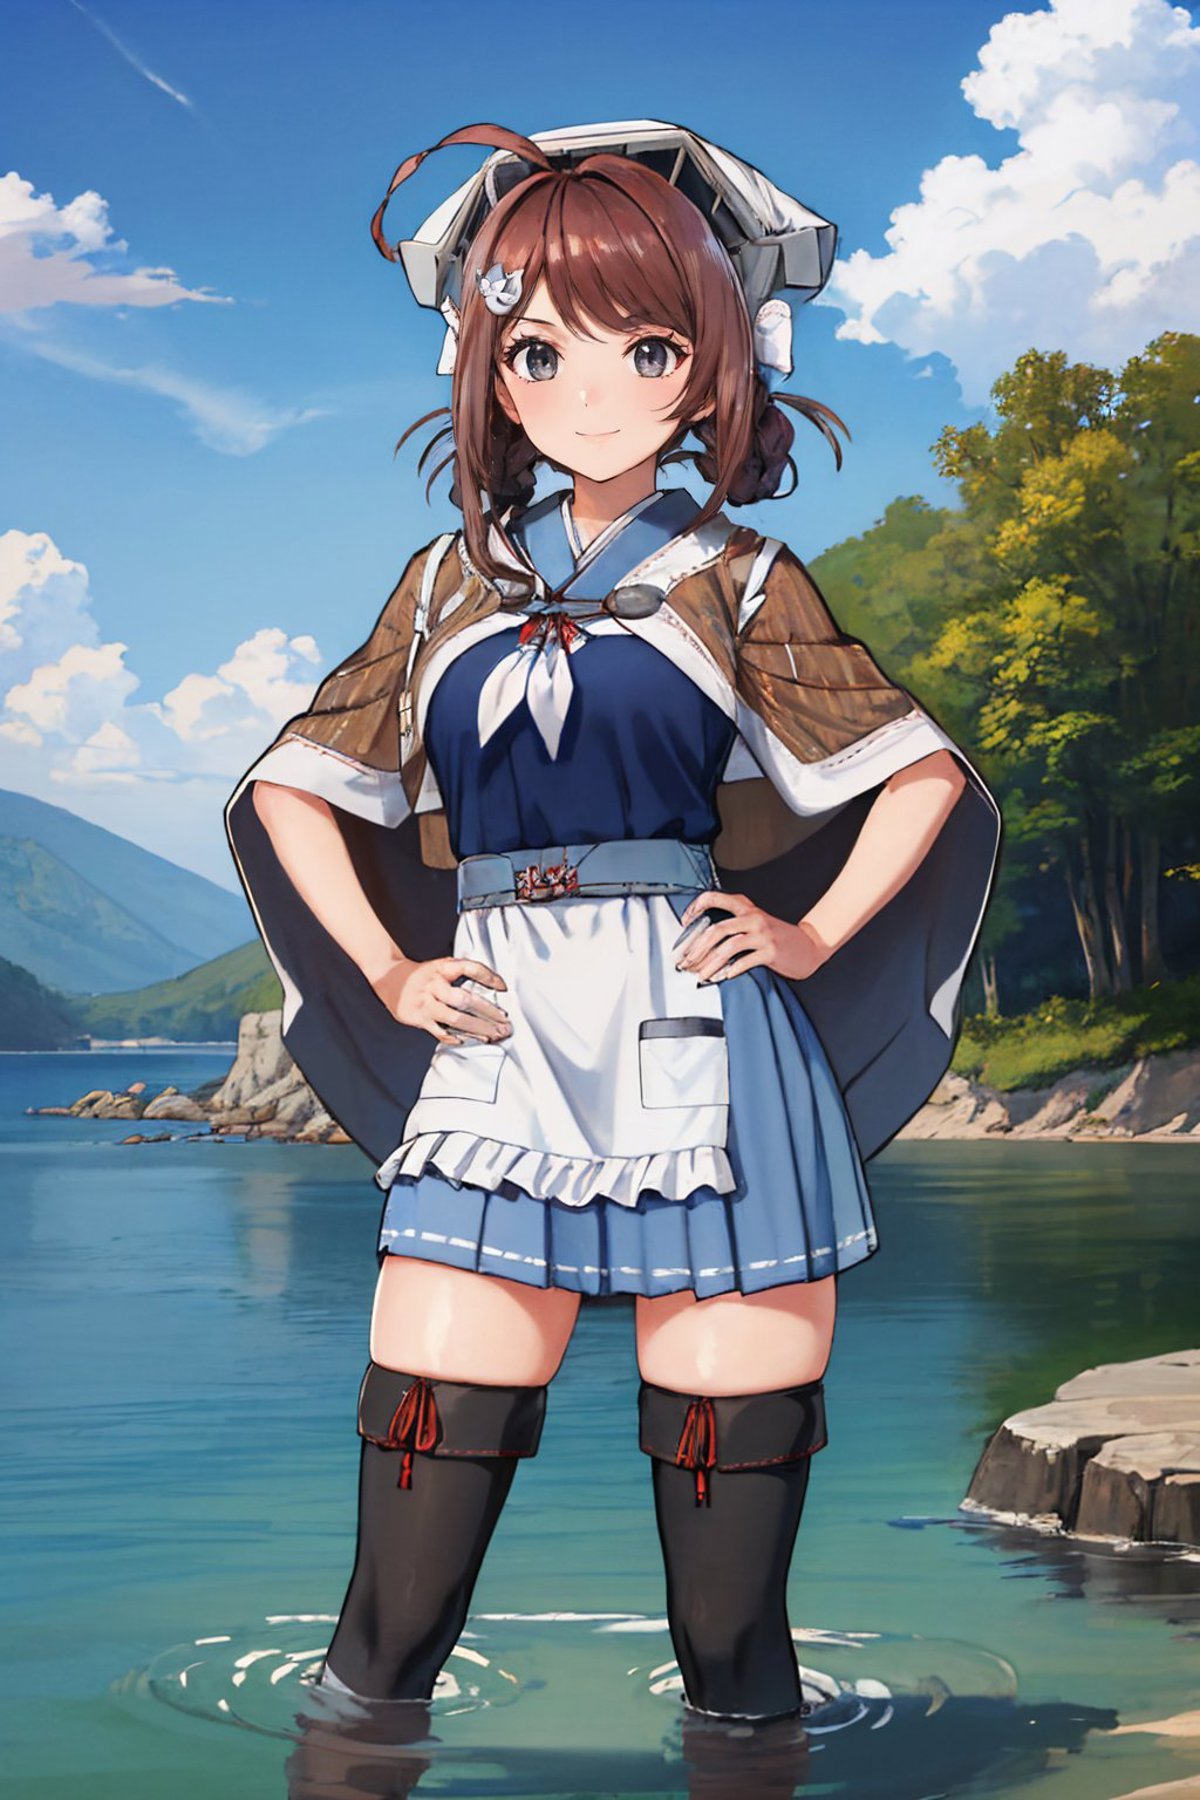 Chougei | Kantai Collection image by justTNP